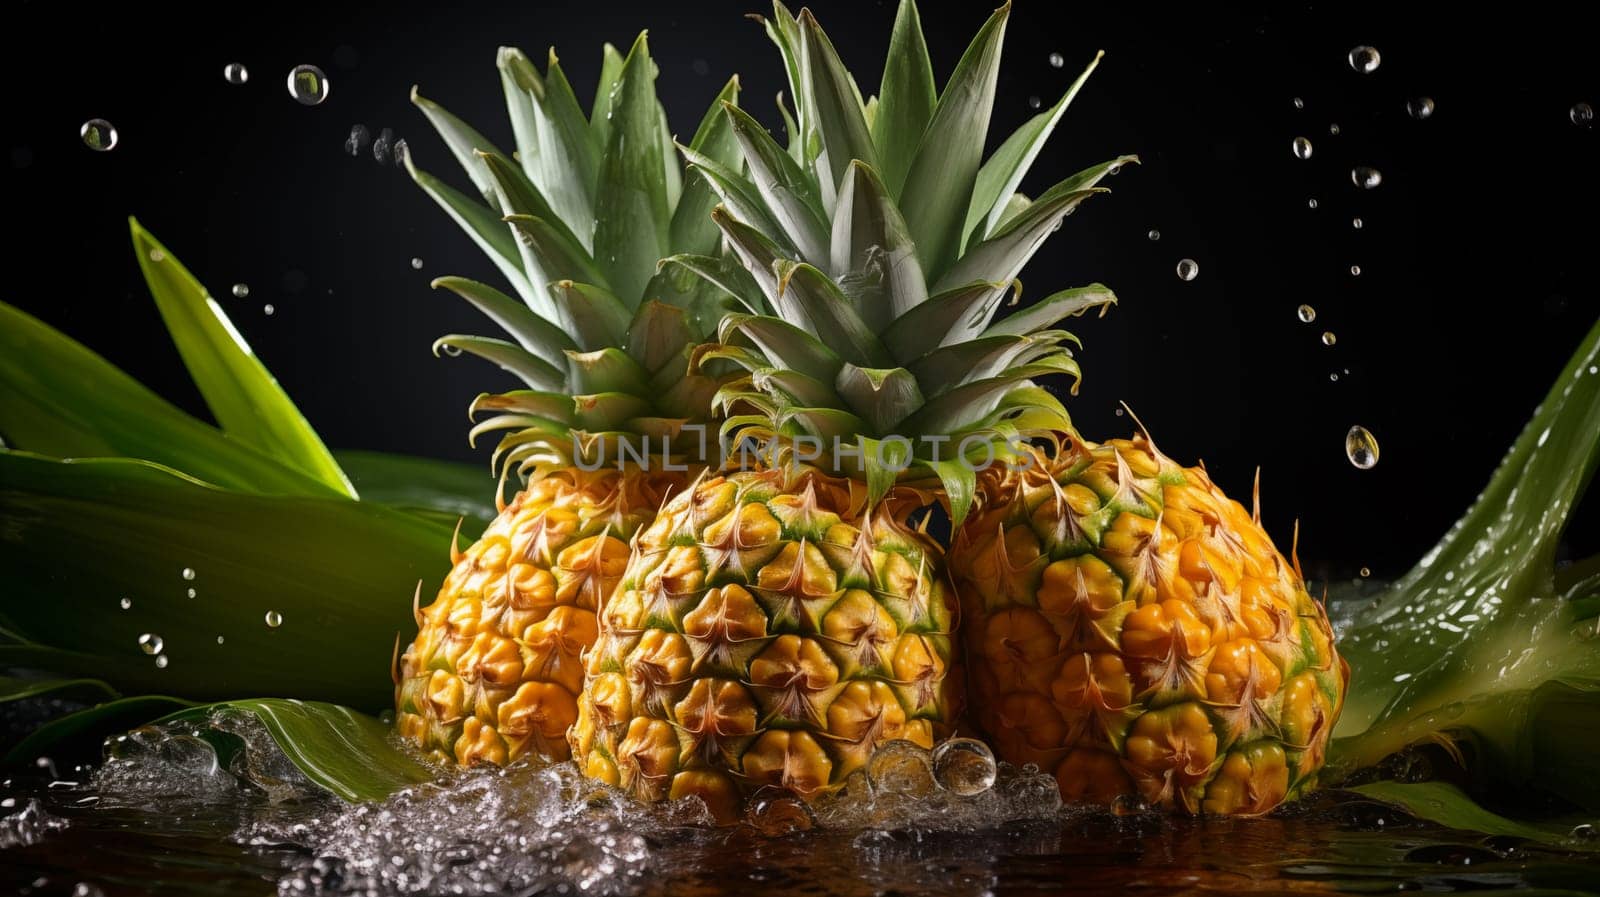 Three beautiful fresh pineapple fall in water, with splashes, black background.